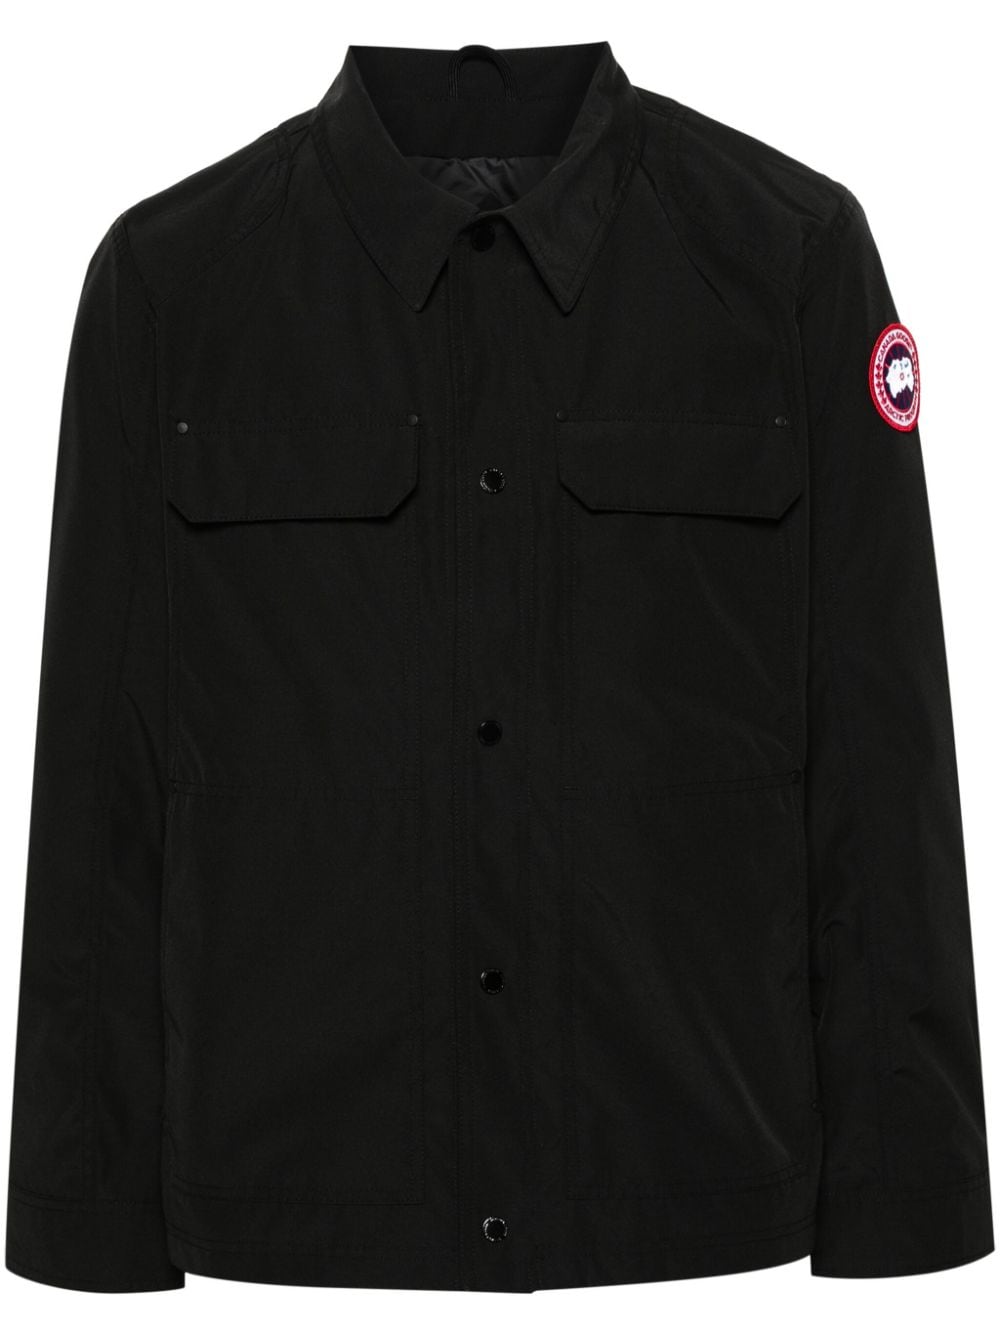 CANADA GOOSE Classic Black Jacket for Men - SS24 Collection